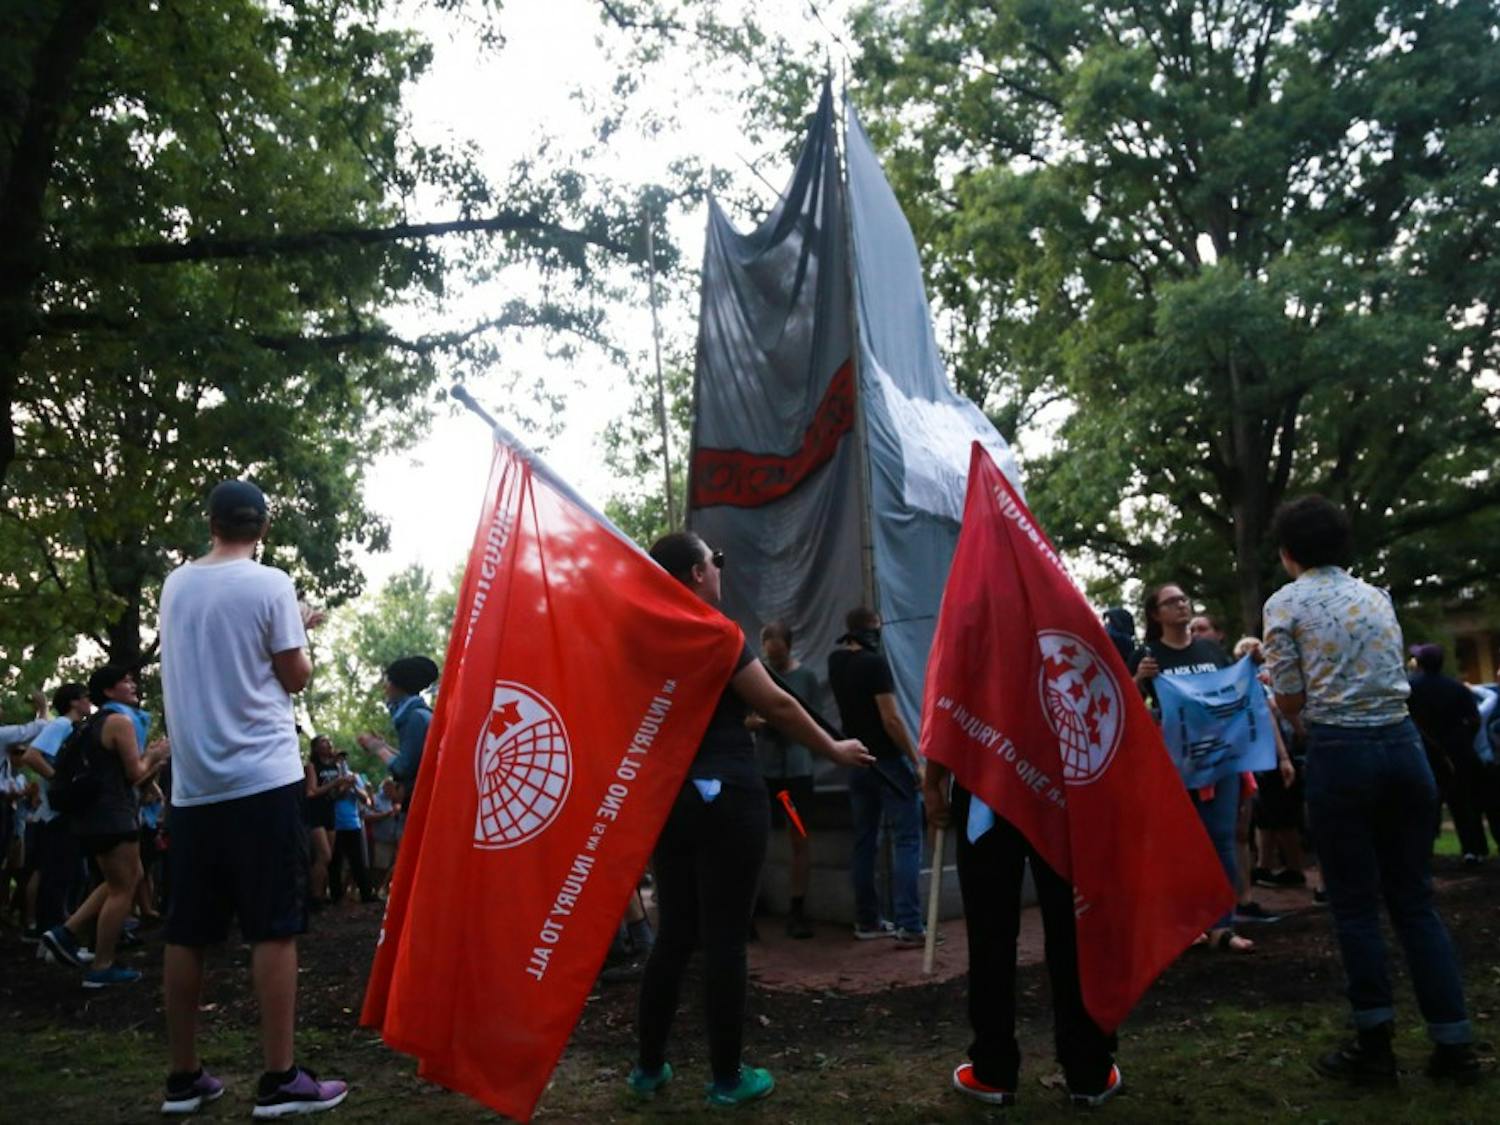 Rally attendees hold flags as other protesters tie banners around Silent Sam.